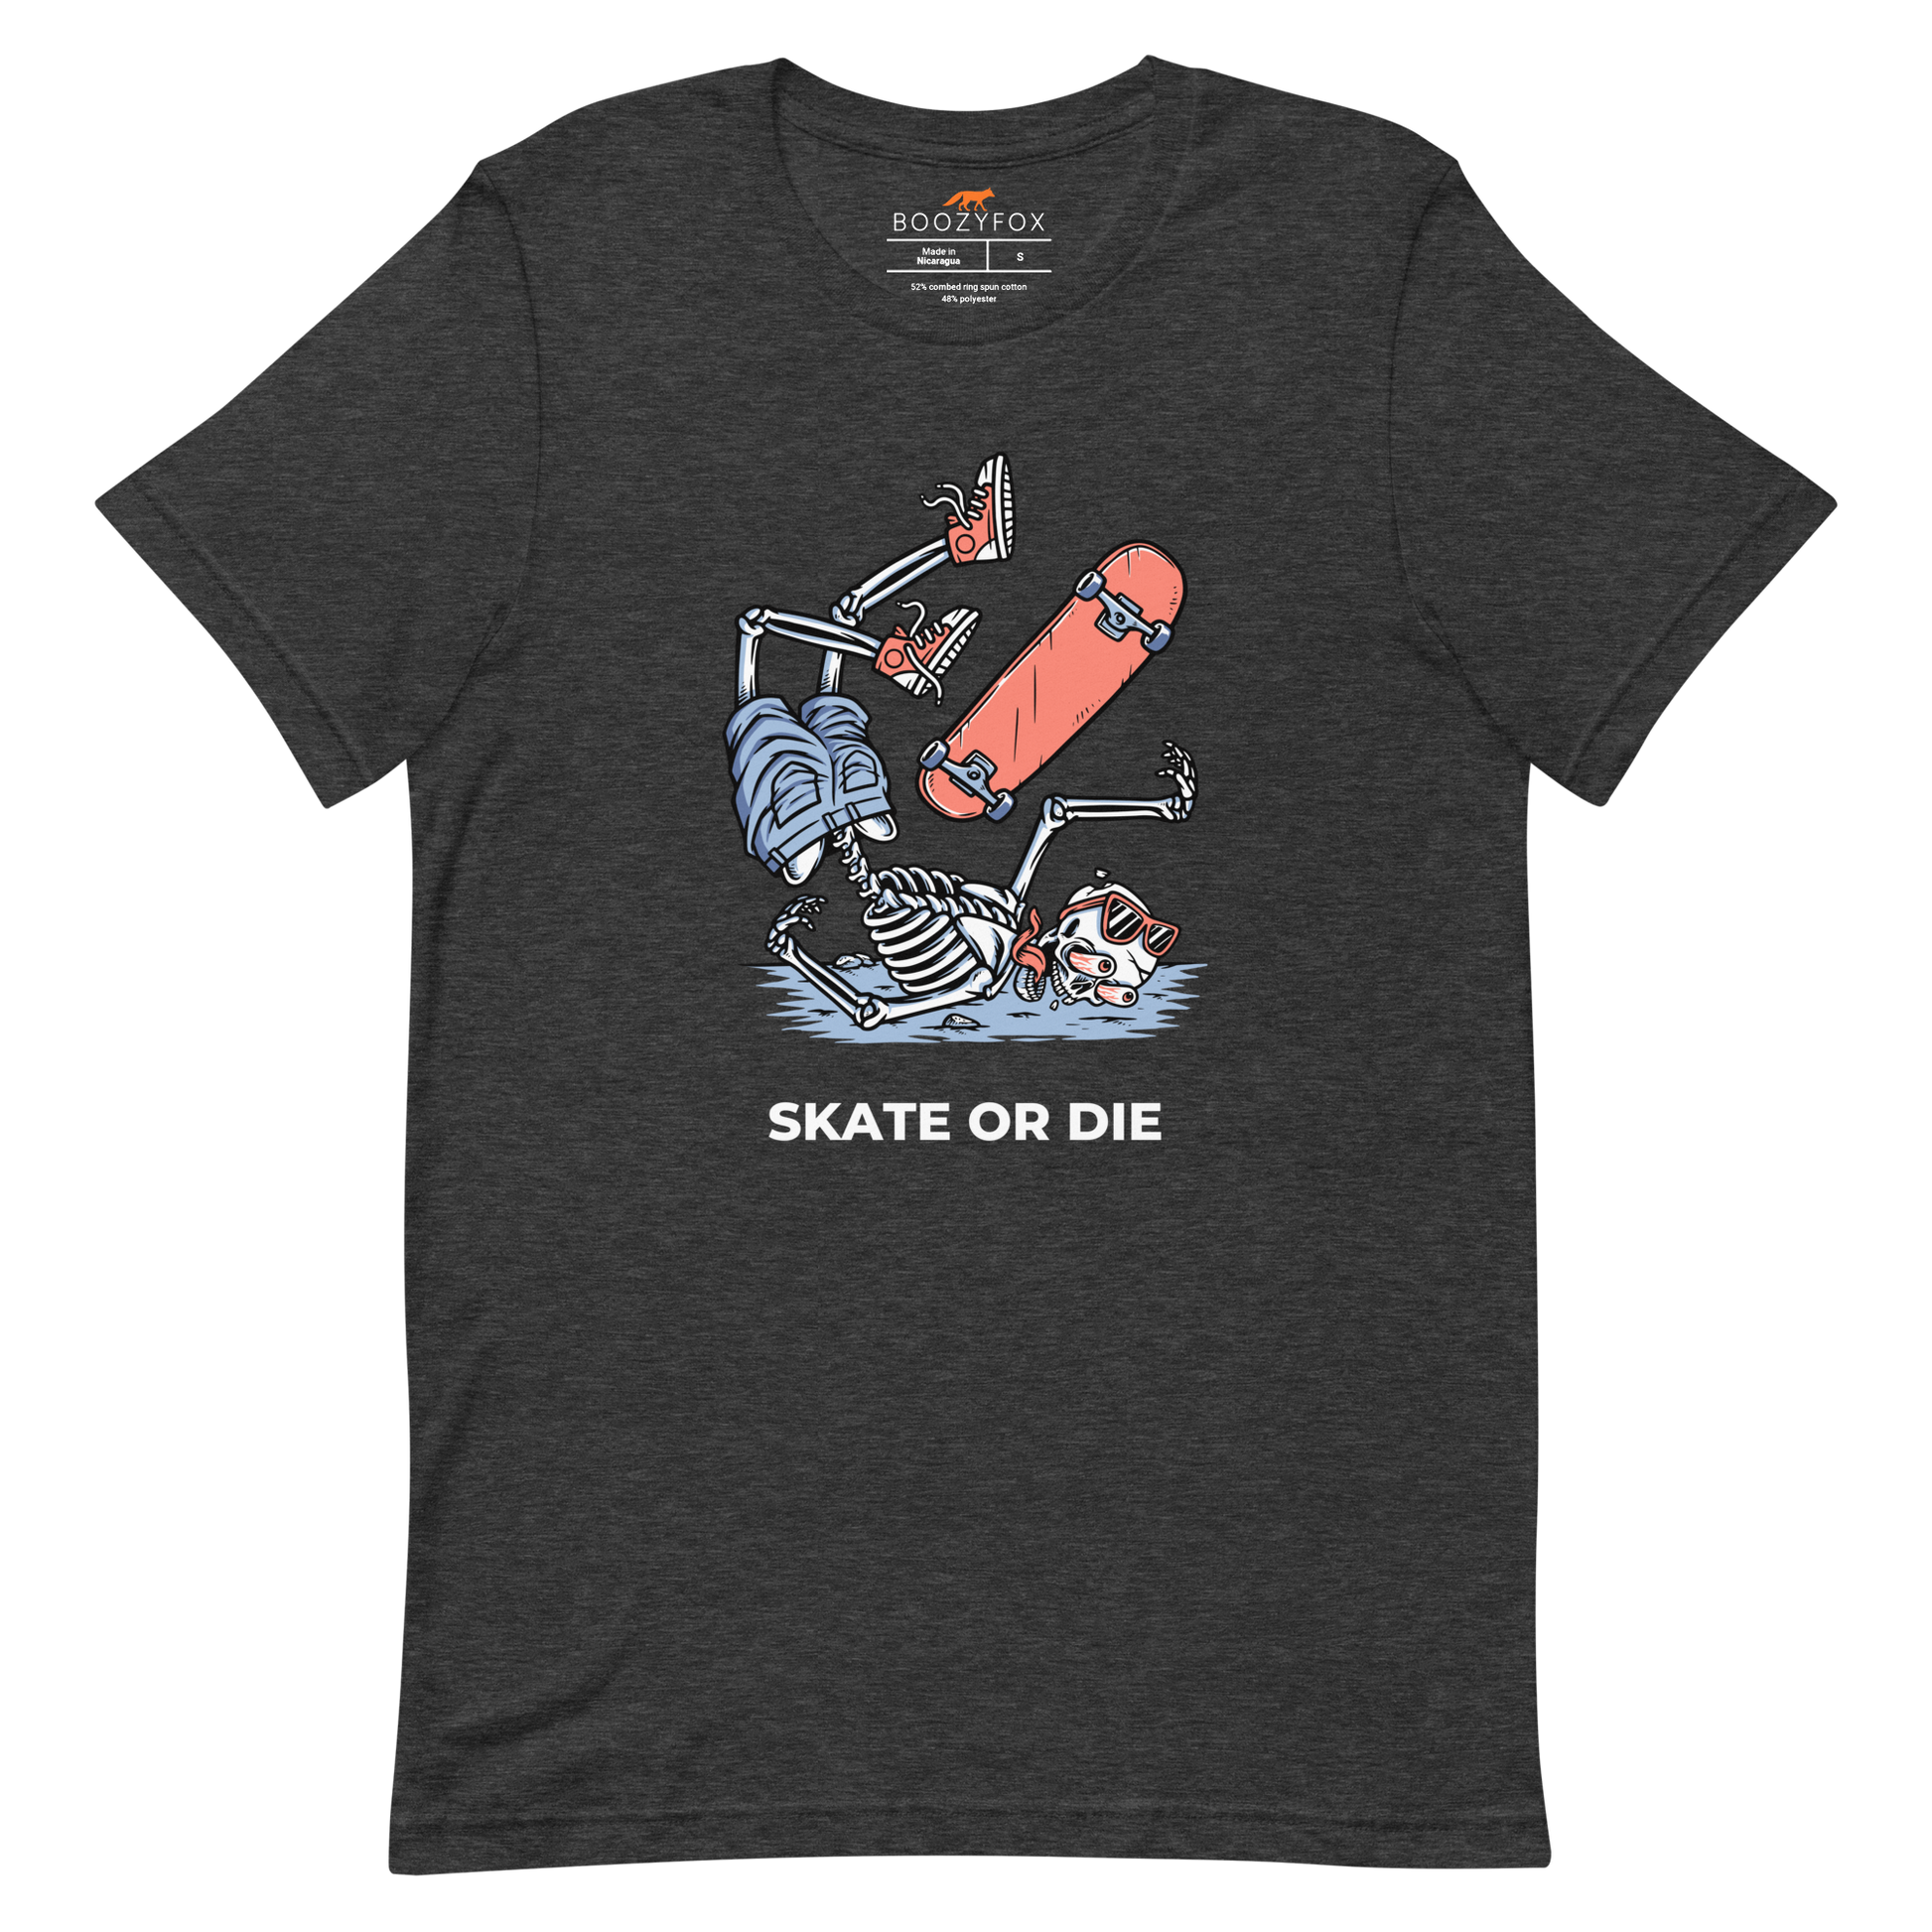 Dark Grey Heather Premium Skate or Die Tee featuring a daring Skeleton Falling While Skateboarding graphic on the chest - Funny Graphic Skeleton Tees - Boozy Fox